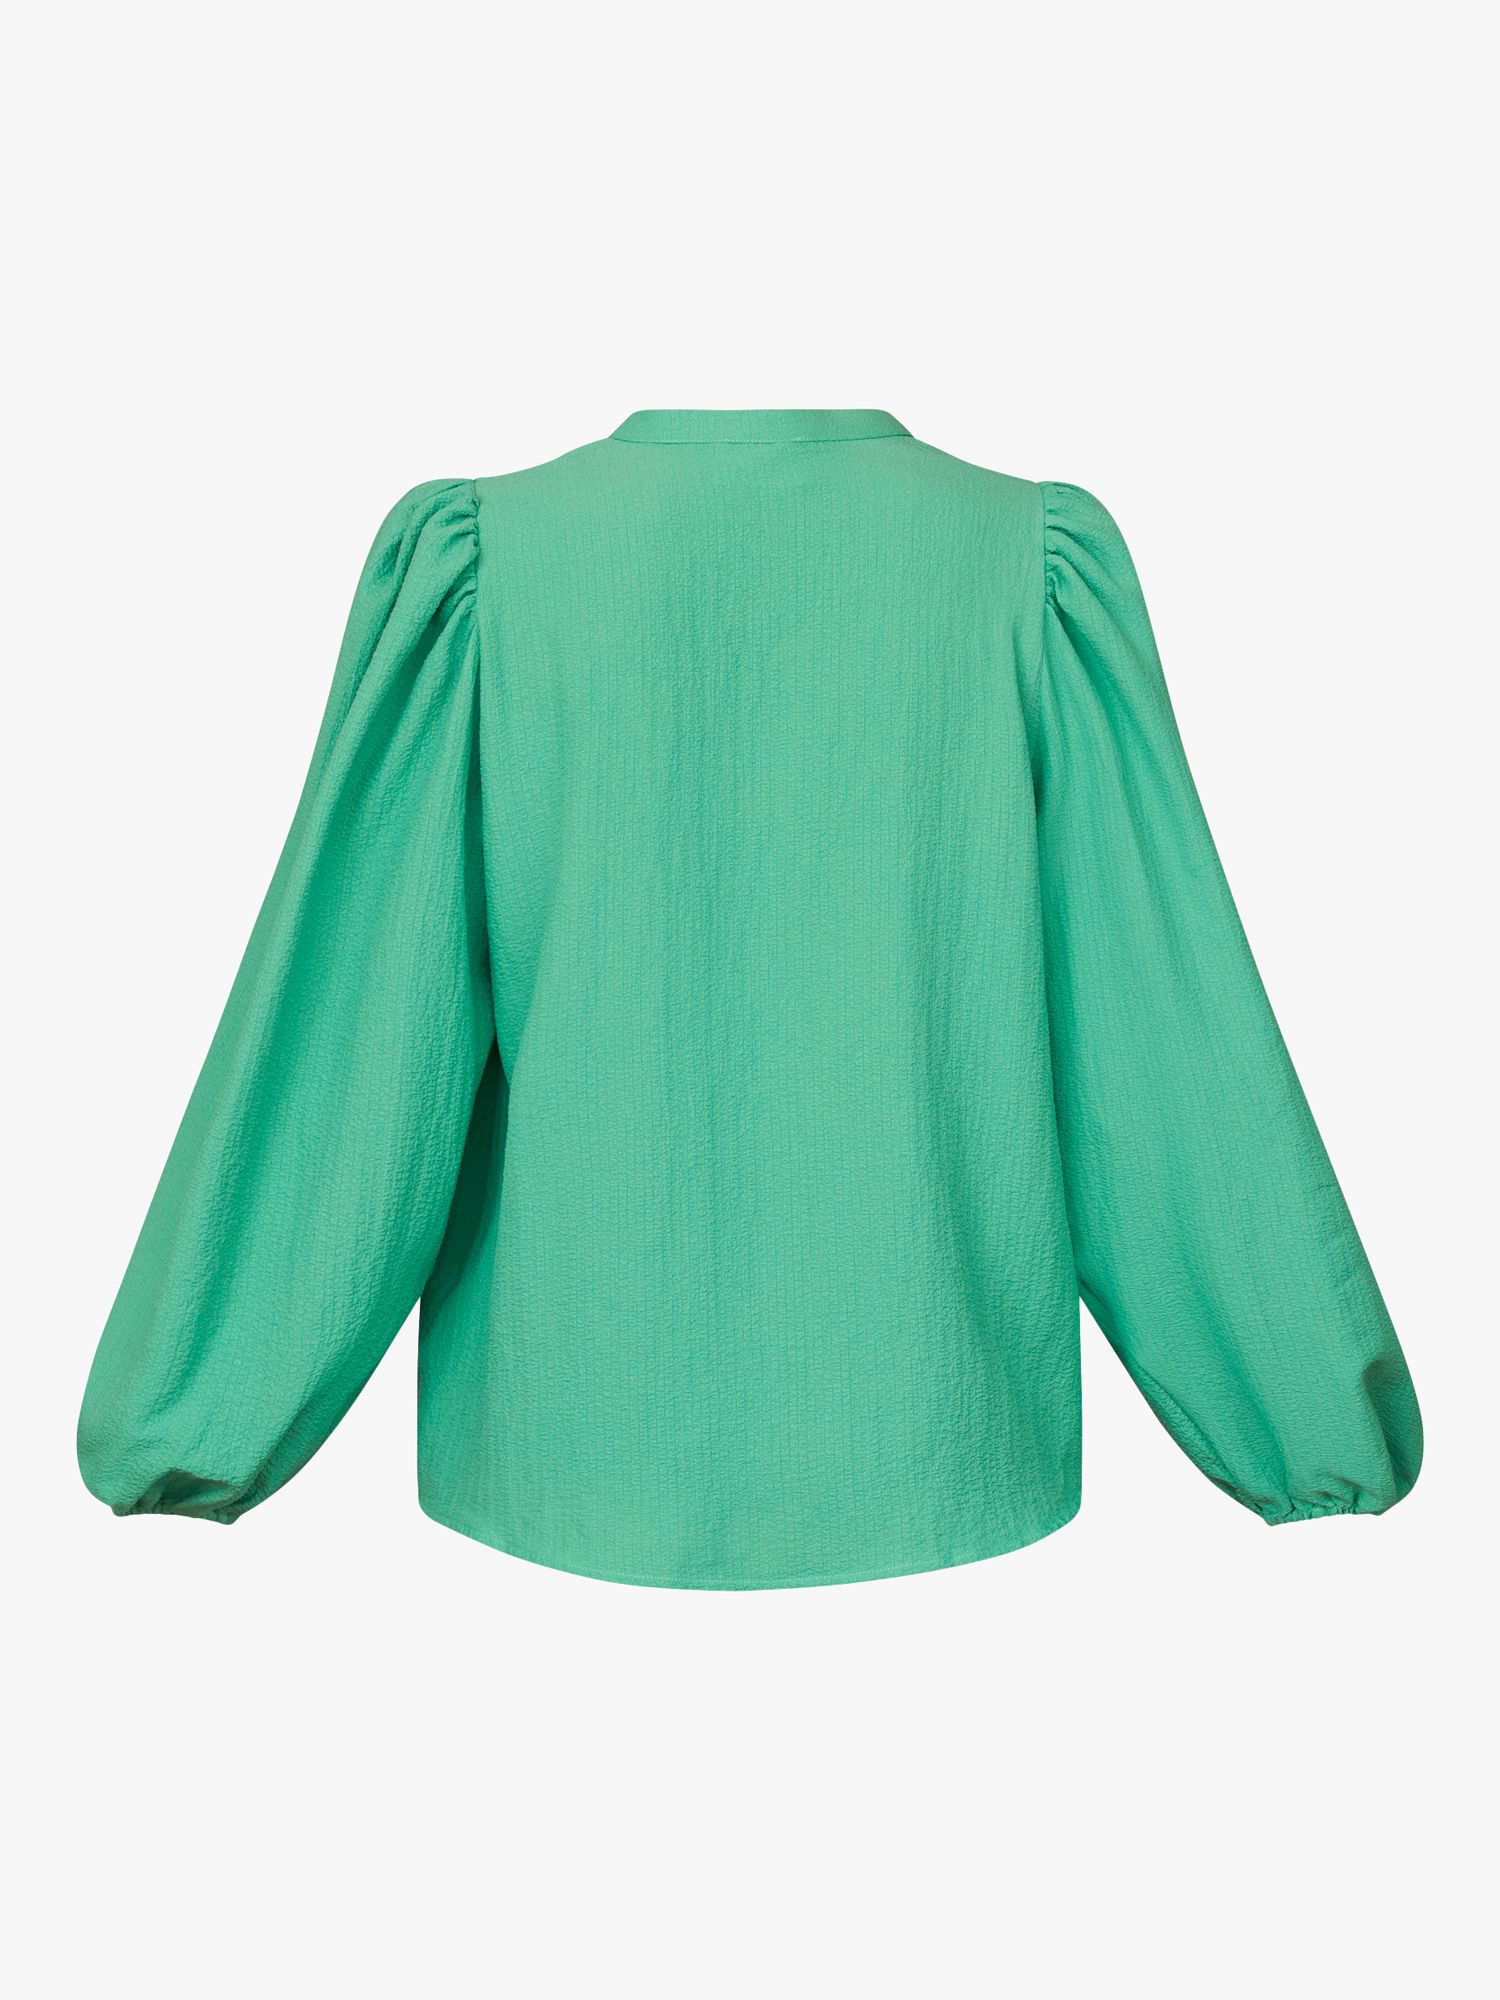 Buy Sisters Point Varia Loose Fitted Soft Shirt, Light Jade Online at johnlewis.com